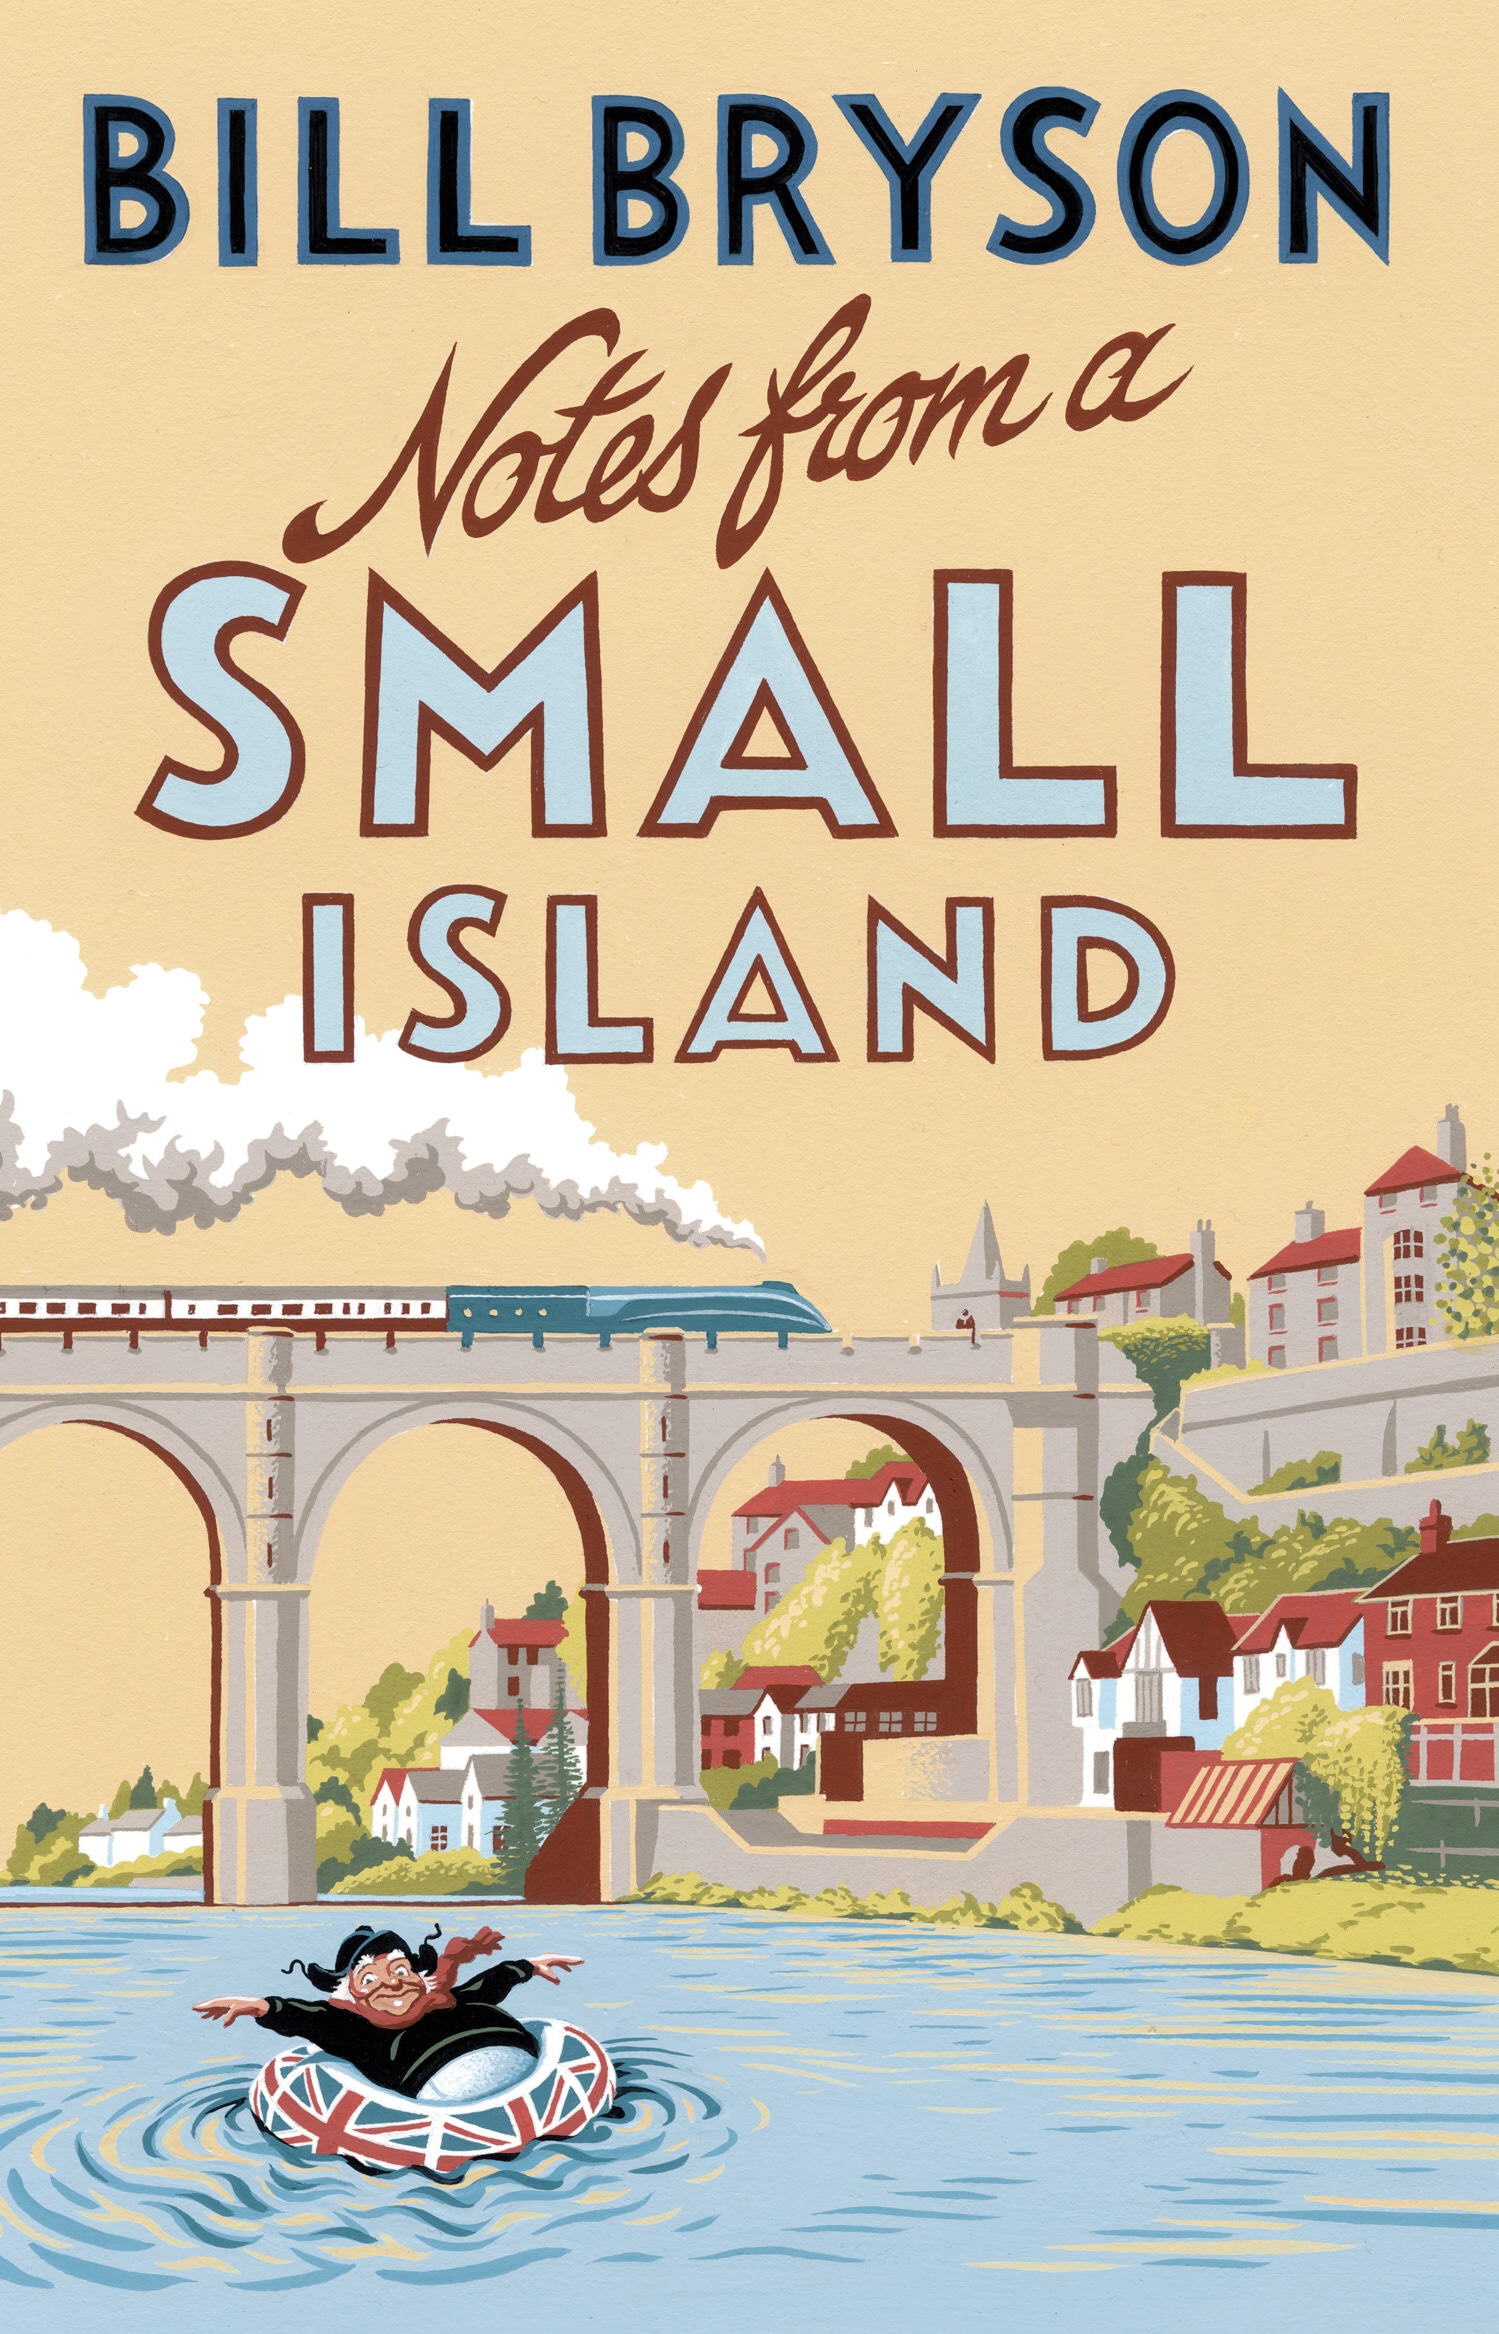 Book “Notes From A Small Island” by Bill Bryson — July 30, 2015